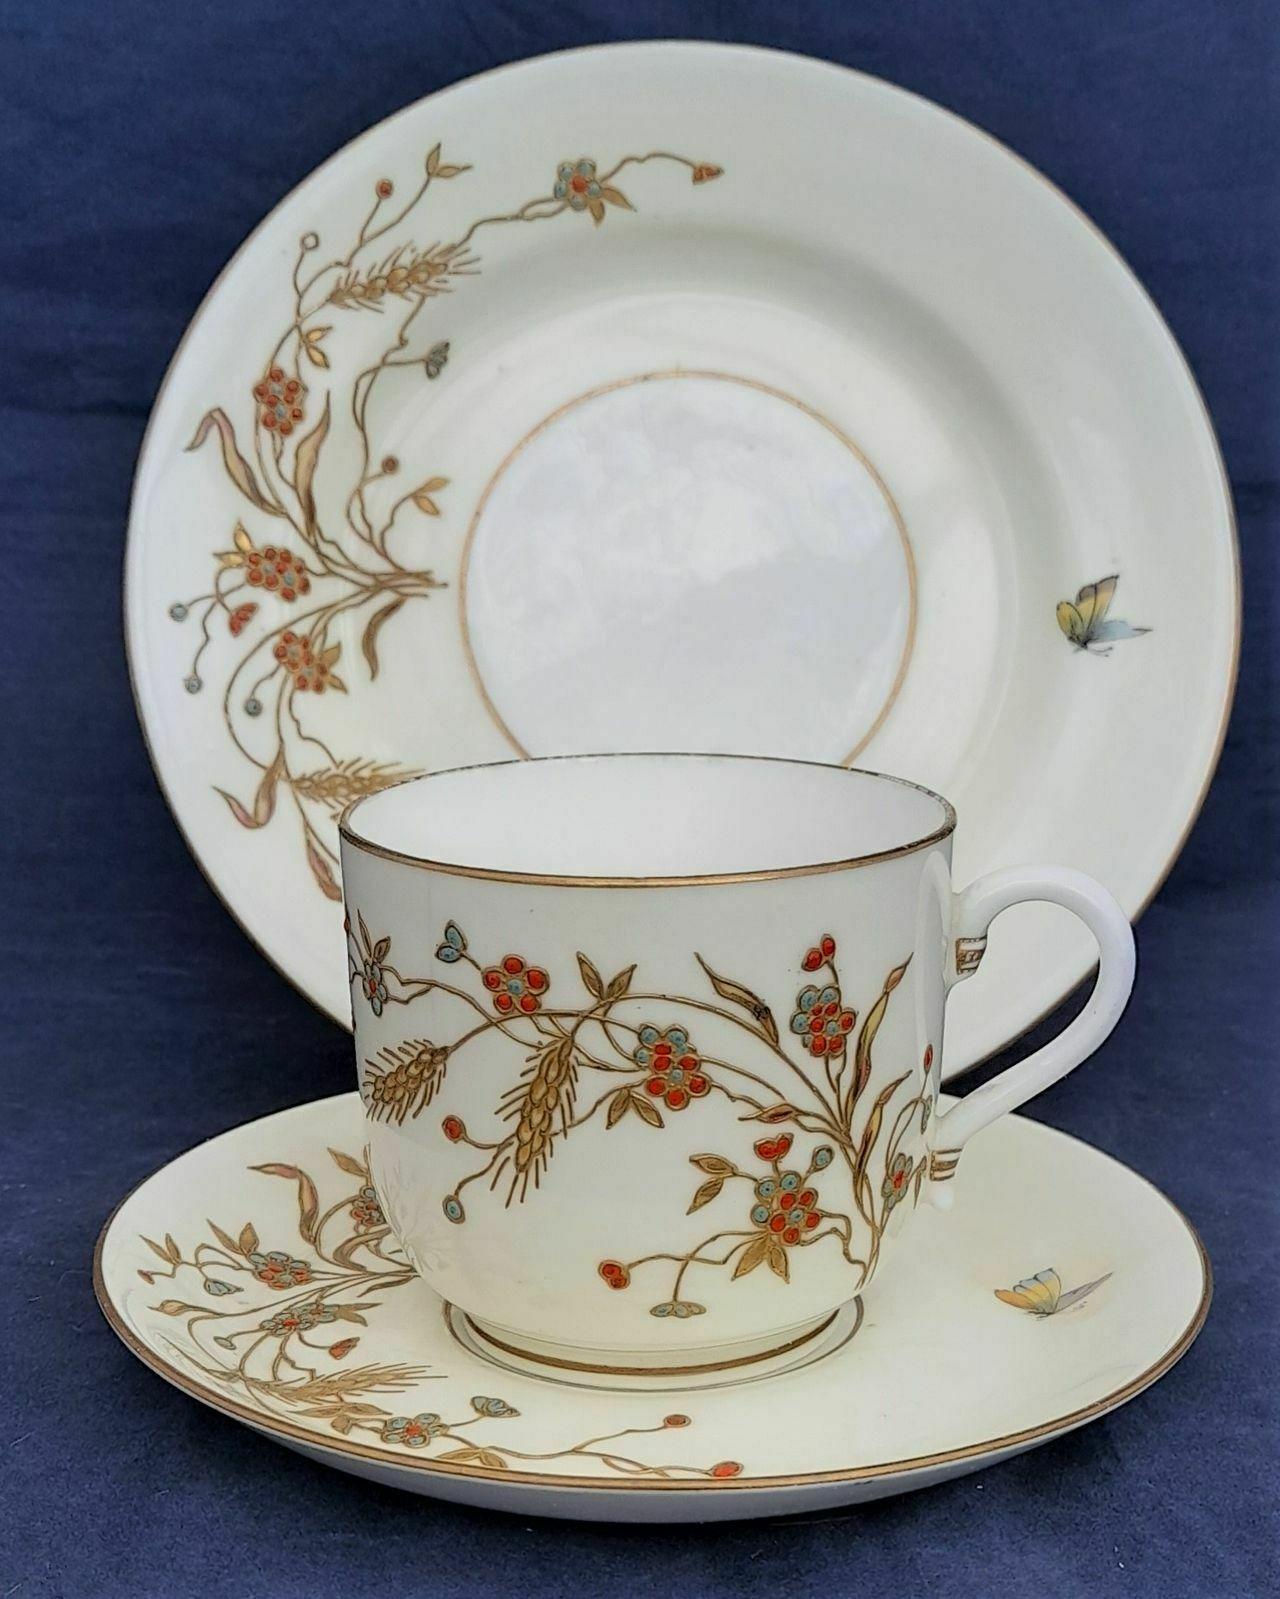 Antique Aesthetic Movement Moore Brothers Cup Saucer & Plates Set Gilded & Hand Painted with Jewelled Flowers Grasses and Butterflies circa 1875